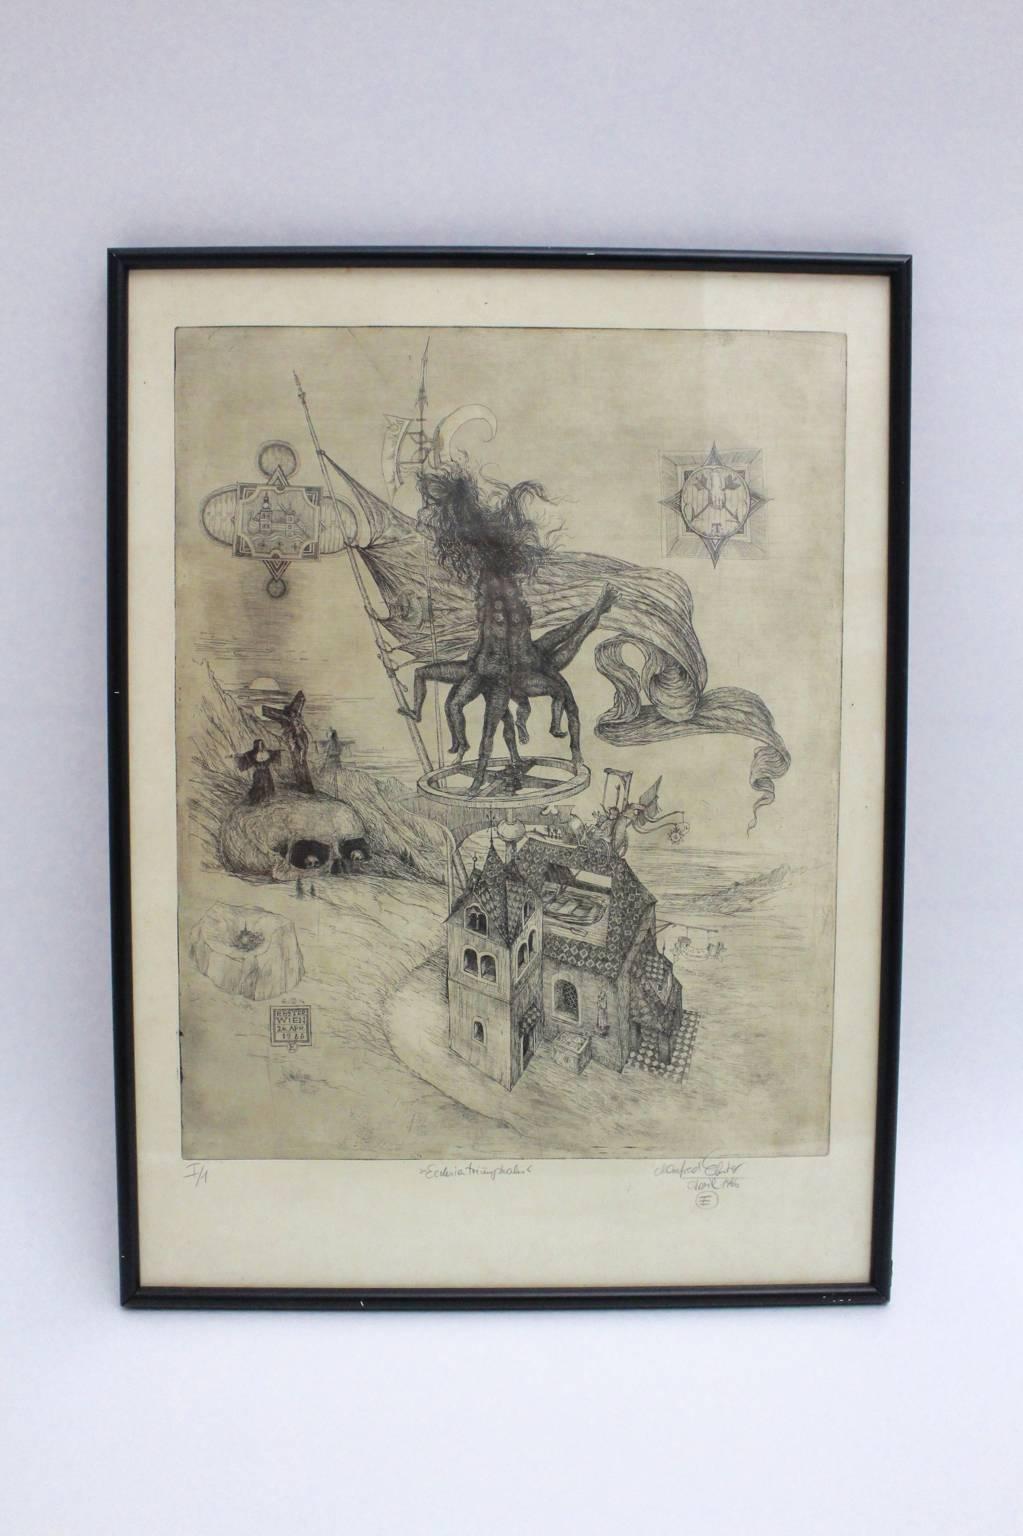 This etching named Ecclesia triumphalis was created by Manfred Ebster, April 1966, Austria.
The artist was born in Frastanz Vorarlberg, Austria, 1941.
Manfred Ebster had many exhibitions around the world.
The etching is signed and dated - April